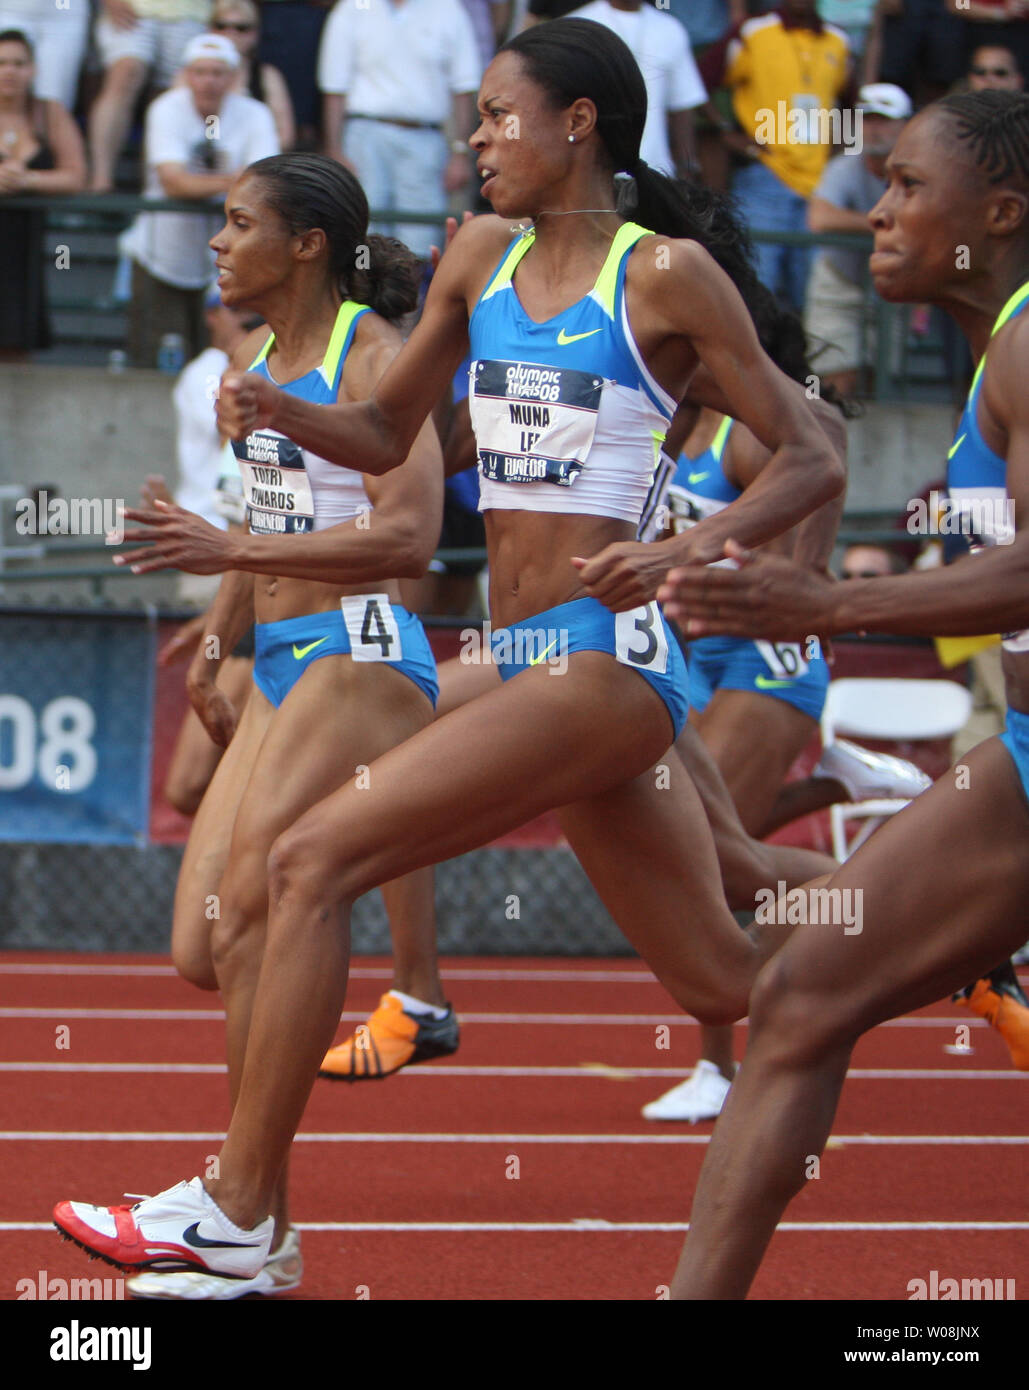 U.S. sprinter Muna Lee (C) makes her move past Torri Edwards (L) and Lauryn Williams in the finals of the 100 meters at the USA Track and Field trials in Eugene Oregon on June 28, 2008. Lee won the race, but all three qualified for the U.S. Olympic team.    (UPI Photo/Terry Schmitt) Stock Photo